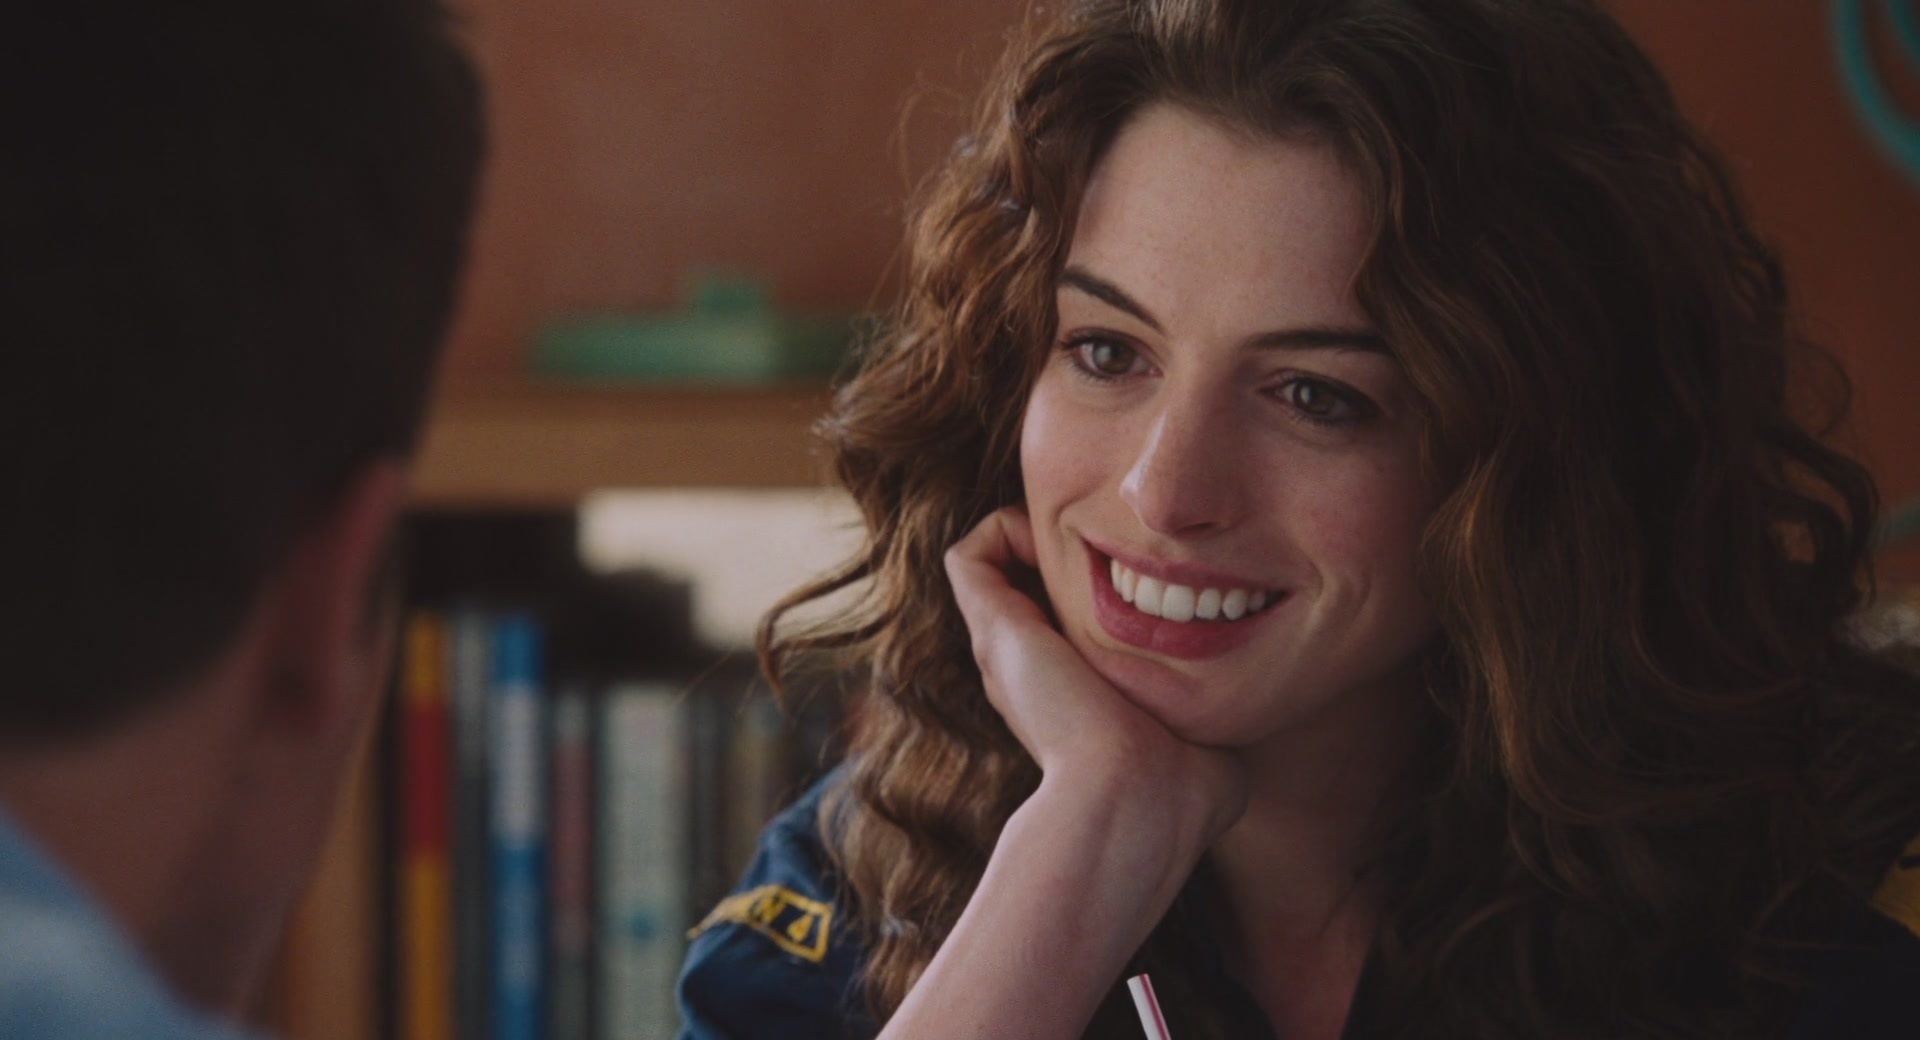 Love and other drugs subtitle download